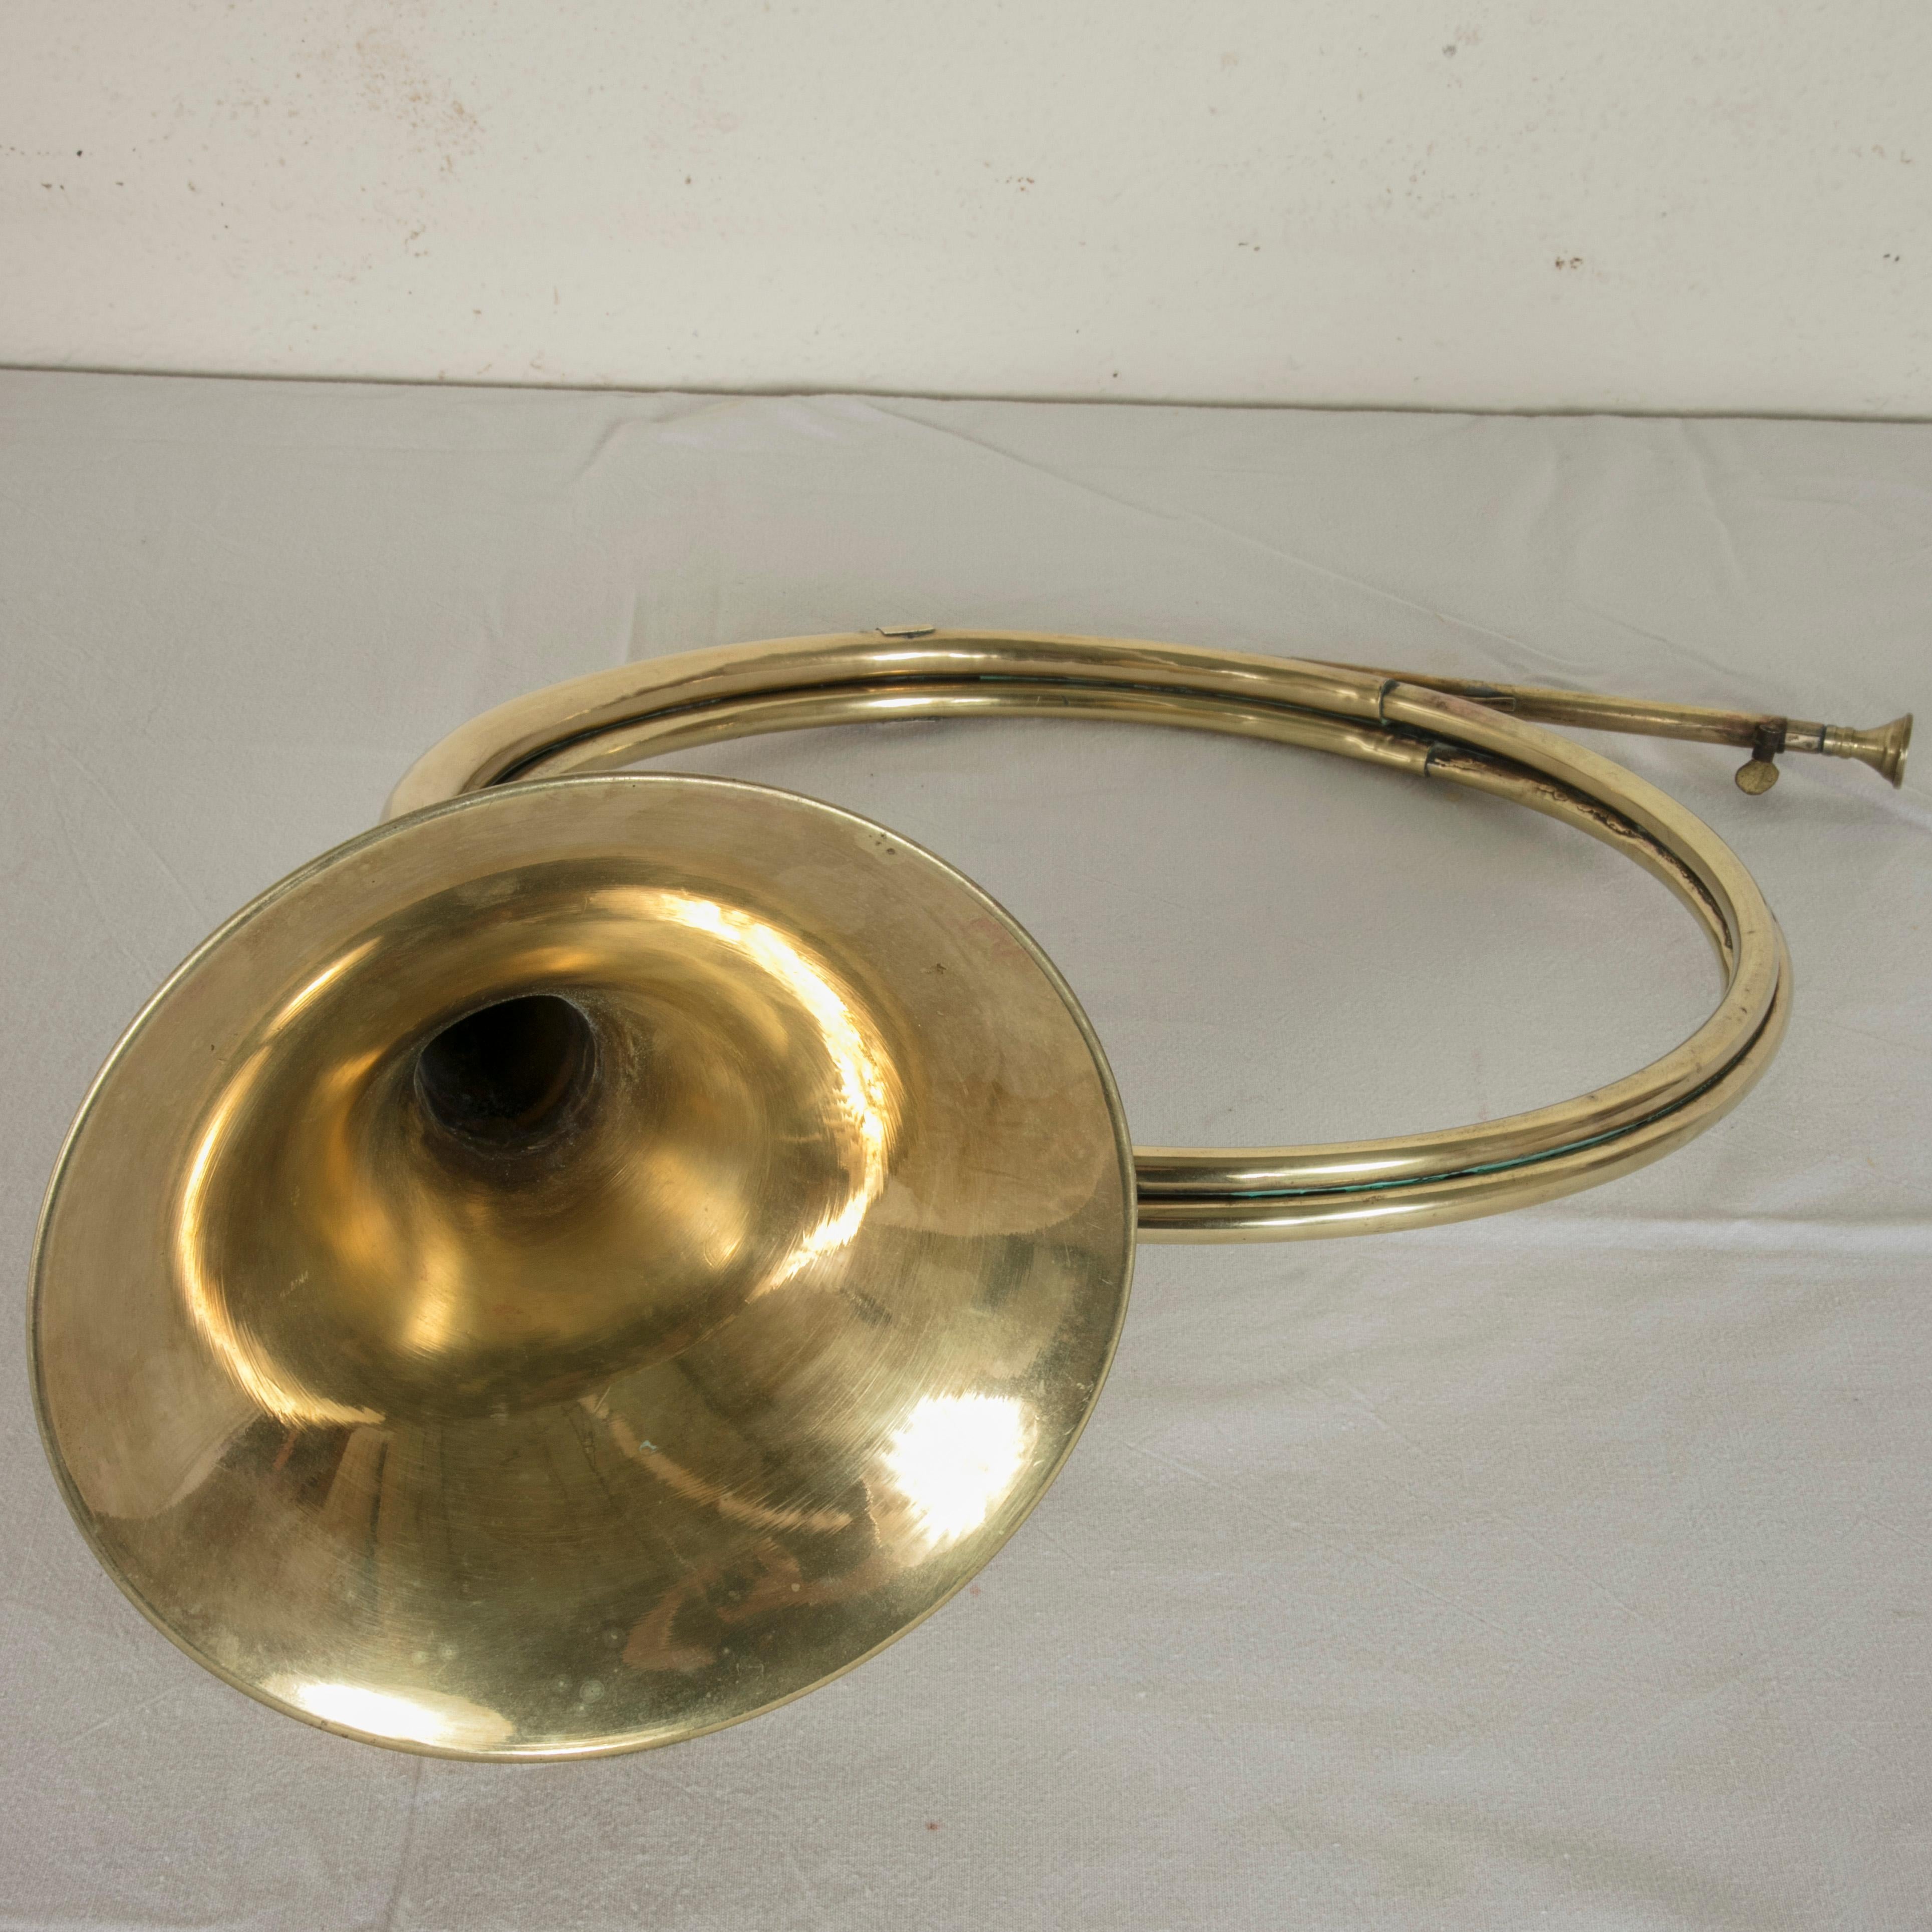 what horn was originally used for hunting